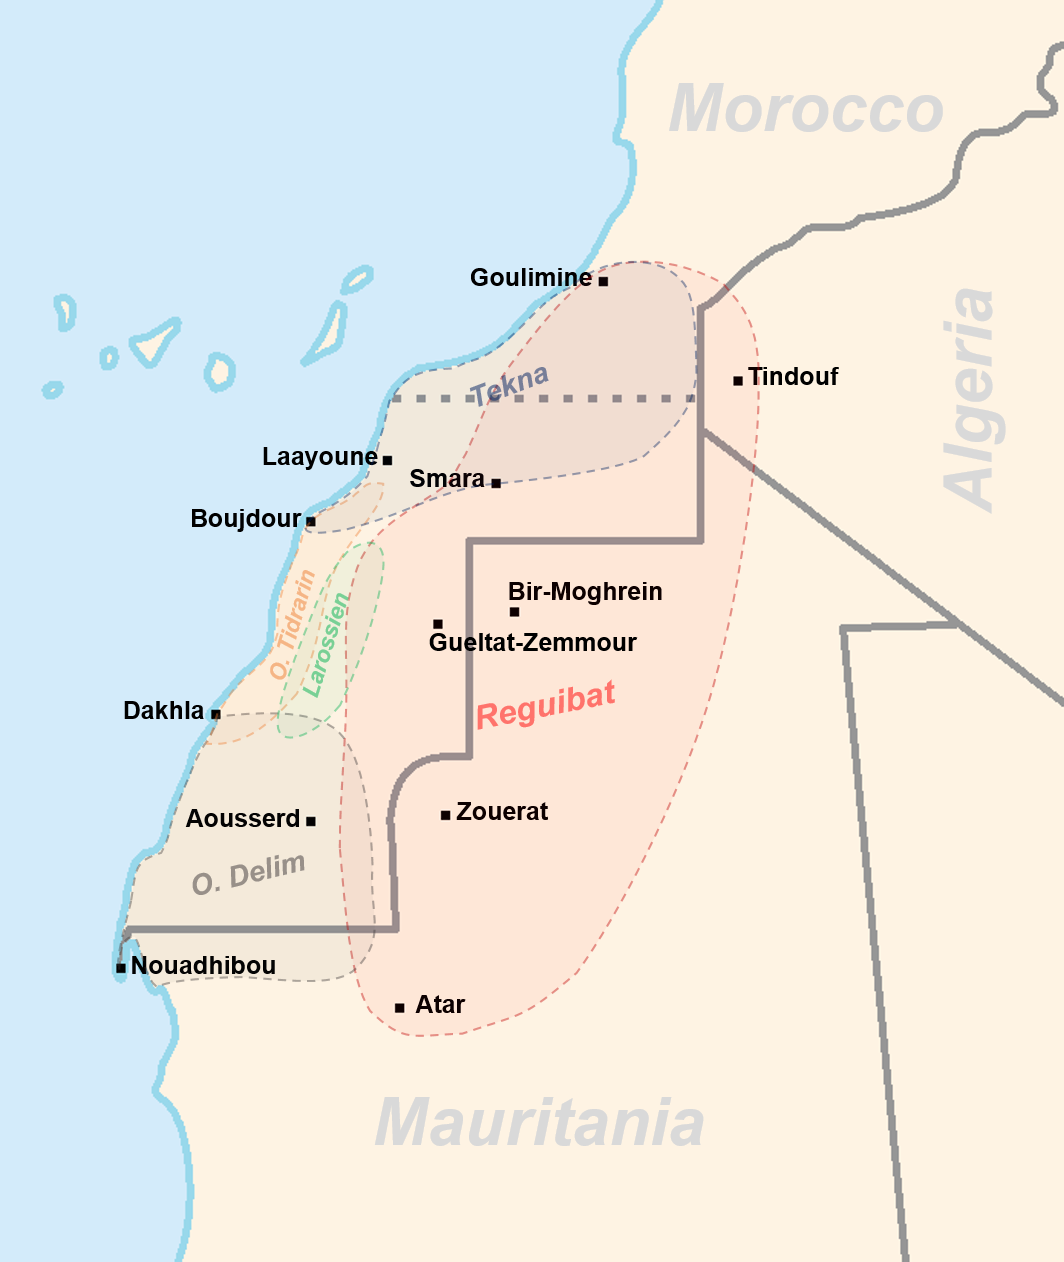 The Sahrawis, or Sahrawi people (Arabic: صحراويون ṣaḥrāwīyūn), are an ethnic group and nation native to the western part of the Sahara desert, which includes the Western Sahara, southern Morocco, much of Mauritania, and along the southwestern border of Algeria. They are of mixed Hassani Arab and Sanhaji Berber descent, as well as Sub-Saharan African and other indigenous populations.As with most peoples living in the Sahara, the Sahrawi culture is a mix of Arab and indigenous African elements. Sahrawis are composed of many tribes and are largely speakers of the Hassaniya dialect of Arabic.